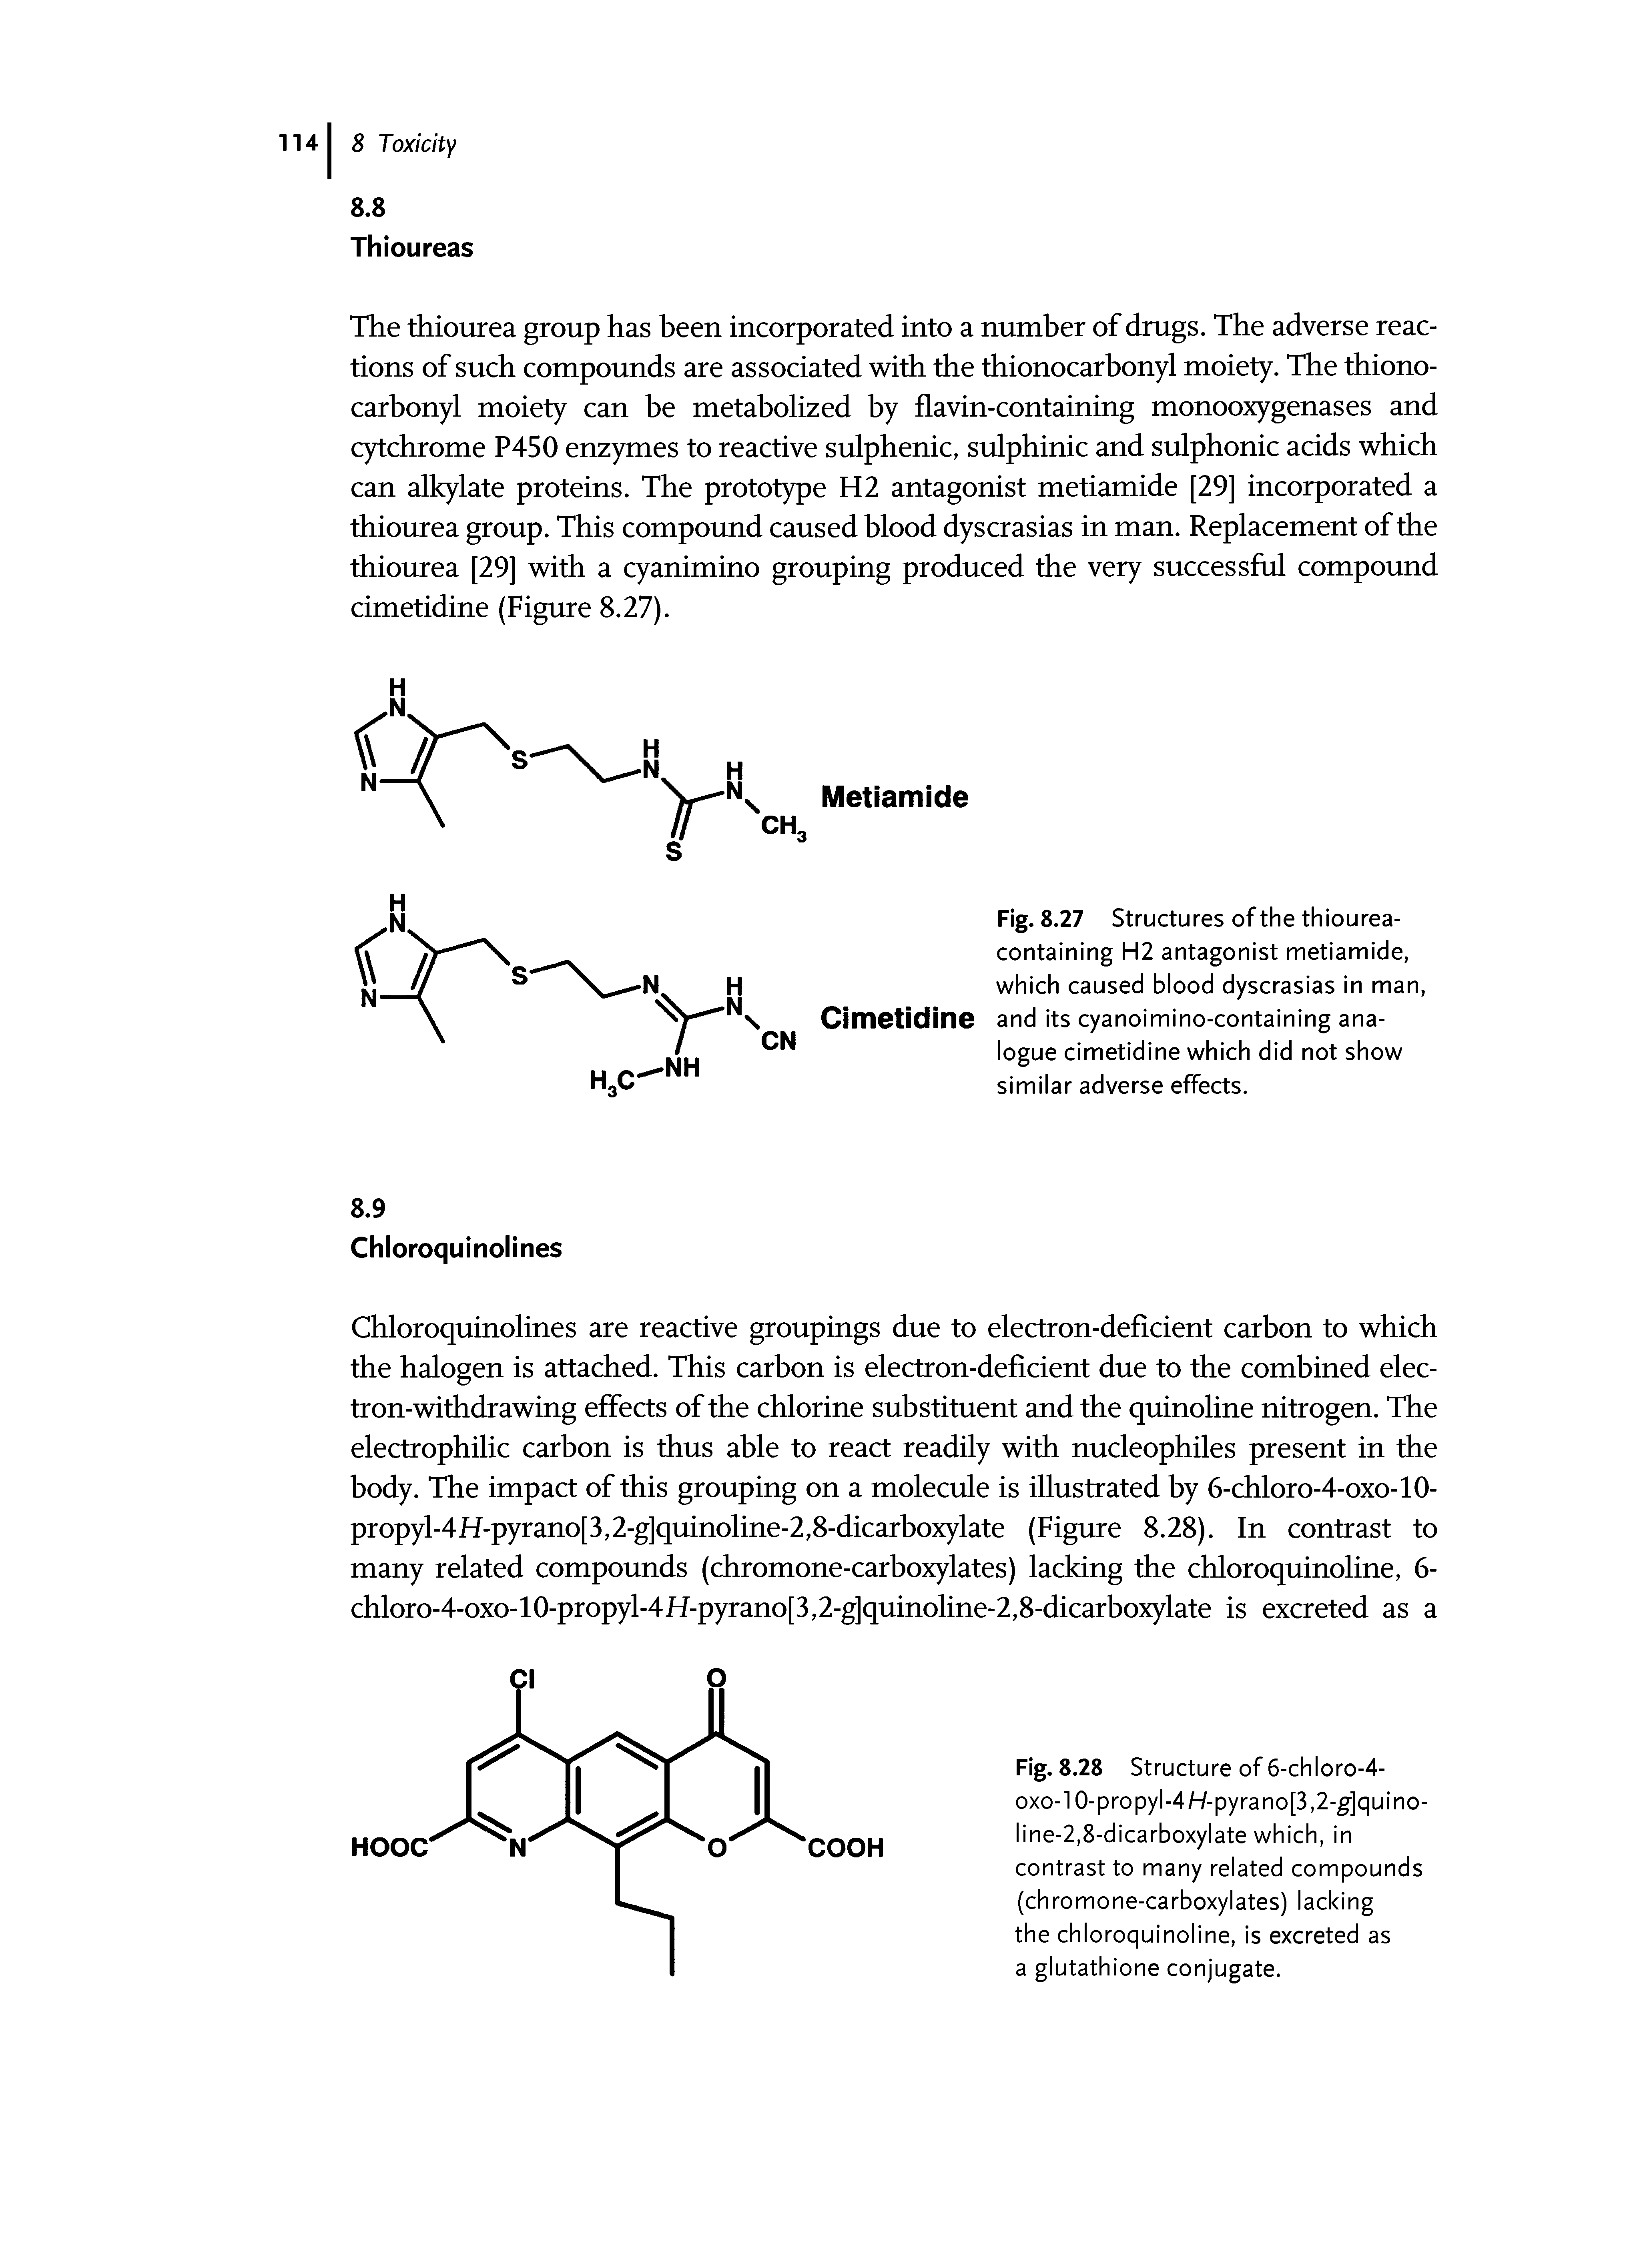 Fig. 8.27 Structures of the thiourea-containing H2 antagonist metiamide, which caused blood dyscrasias in man, Cimetidine and its cyanoimino-containing analogue cimetidine which did not show similar adverse effects.